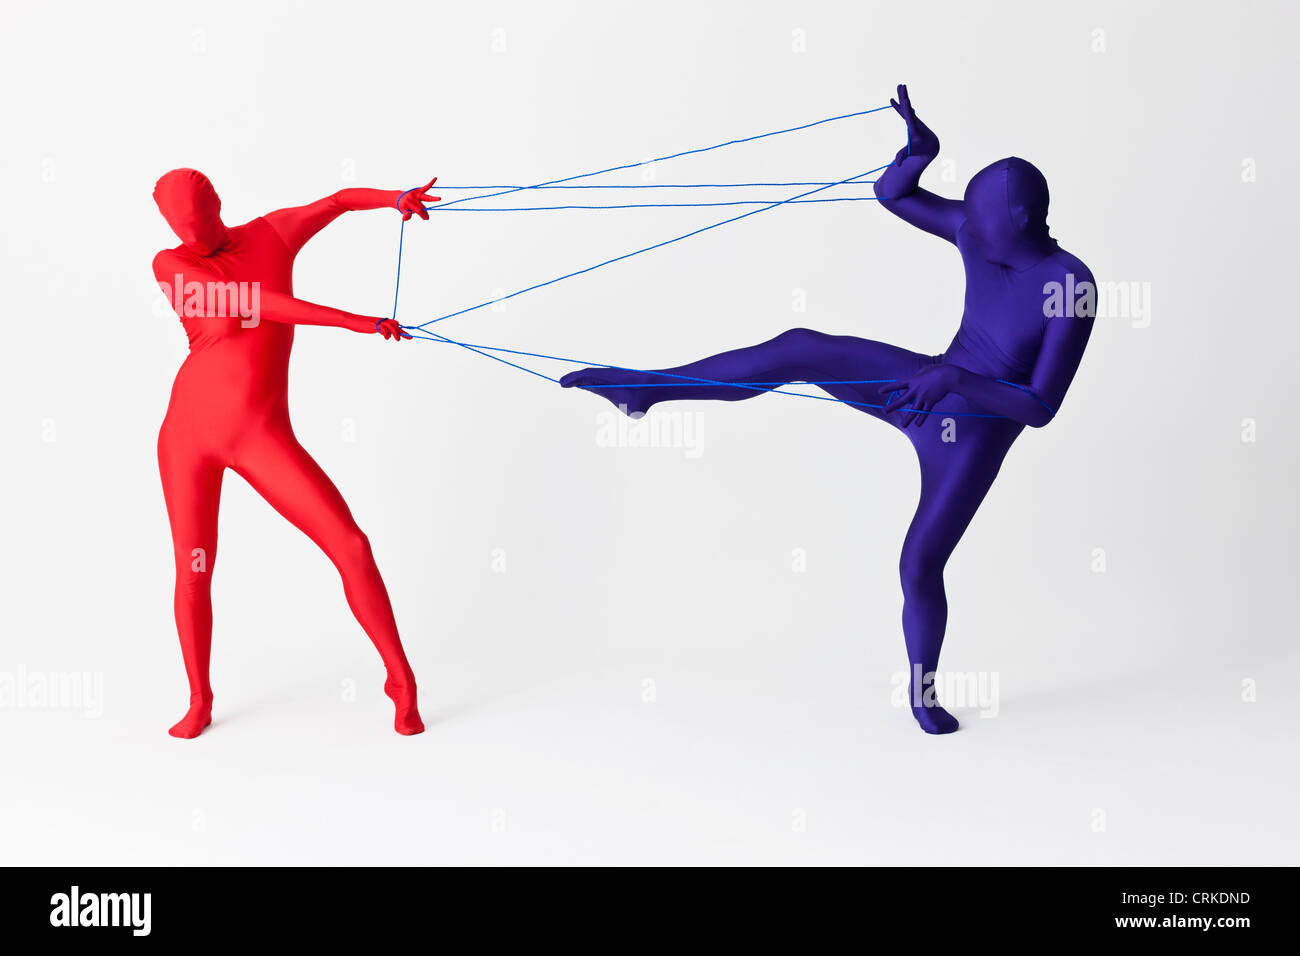 Couple in bodysuits playing with string Stock Photo